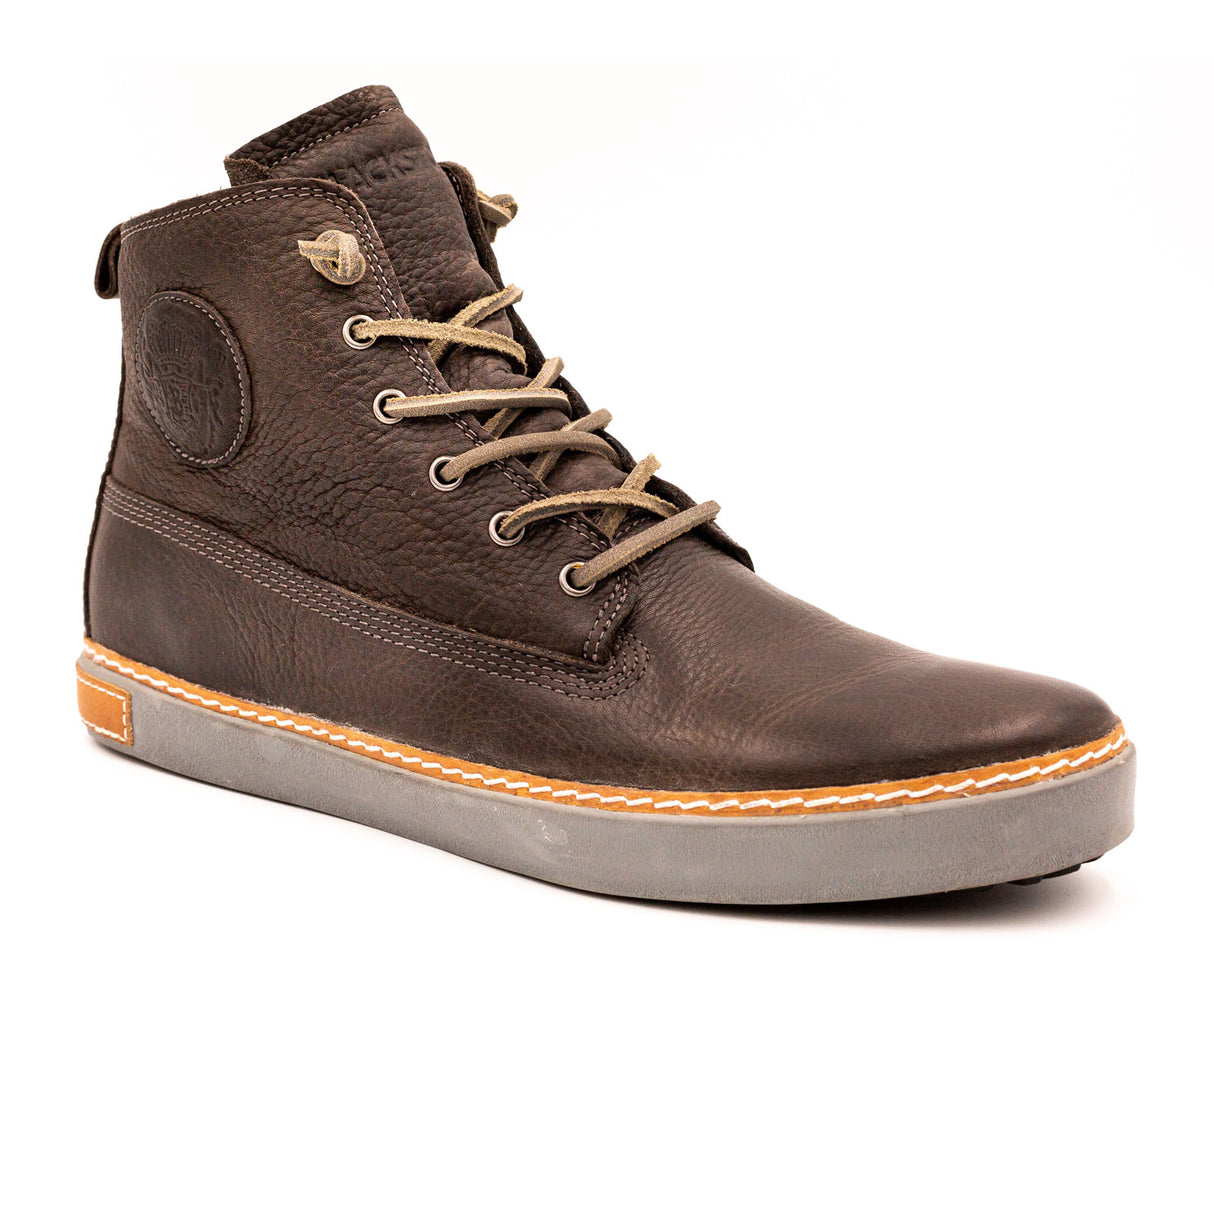 Blackstone AM02 LW High Top Sneaker (Men) - Charcoal Boots - Fashion - Ankle Boot - The Heel Shoe Fitters